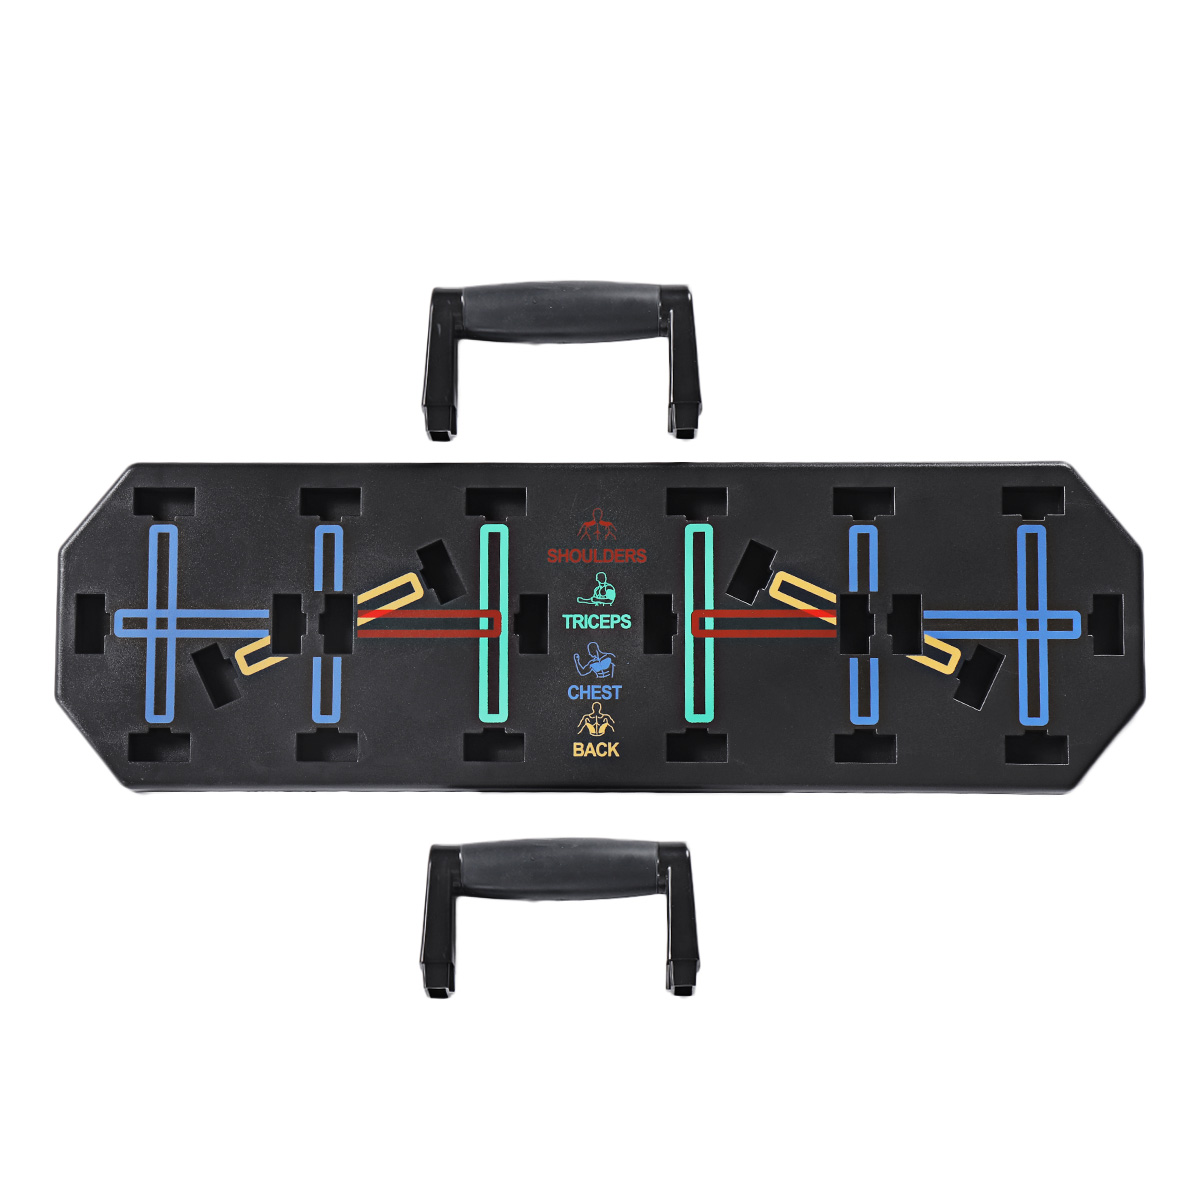 Multifunction-Push-up-Board-Chest-Muscle-Training-Stand-Sports-Gym-Fitness-Exercise-Tools-1764334-1